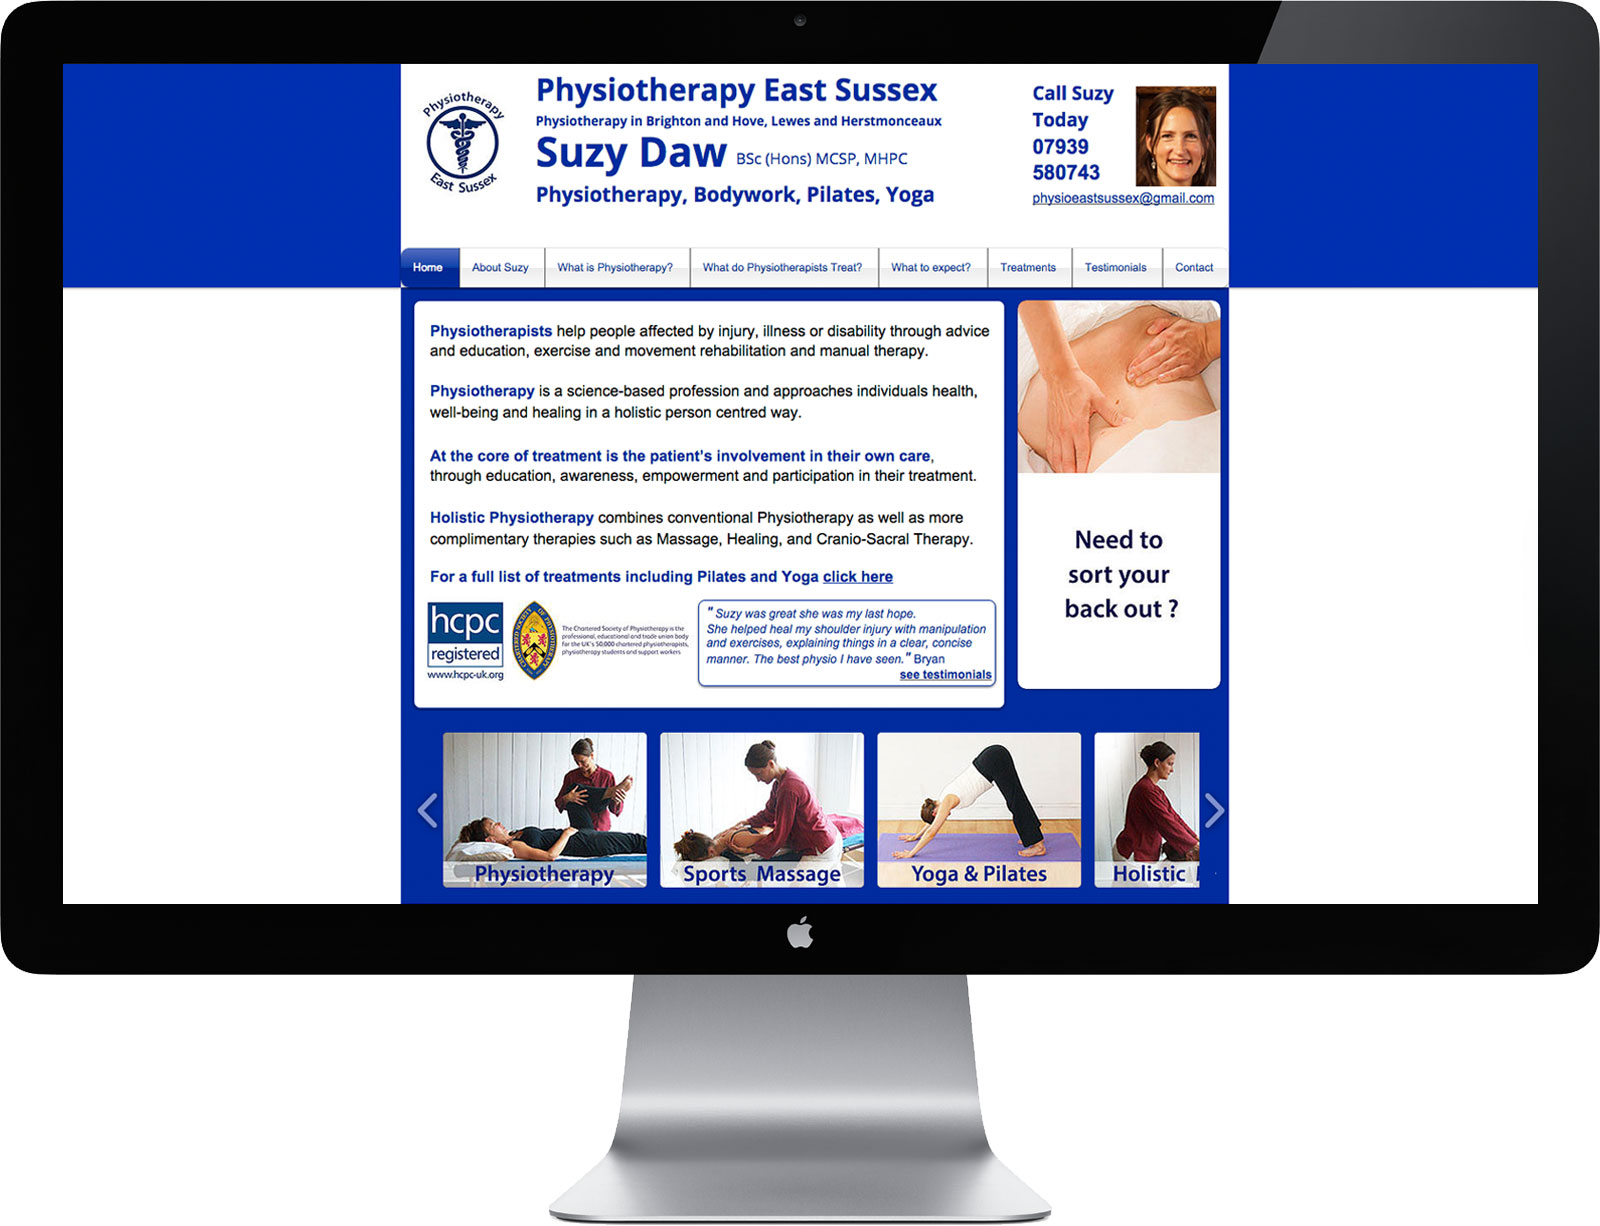 physiotherapy-east-sussex.jpg